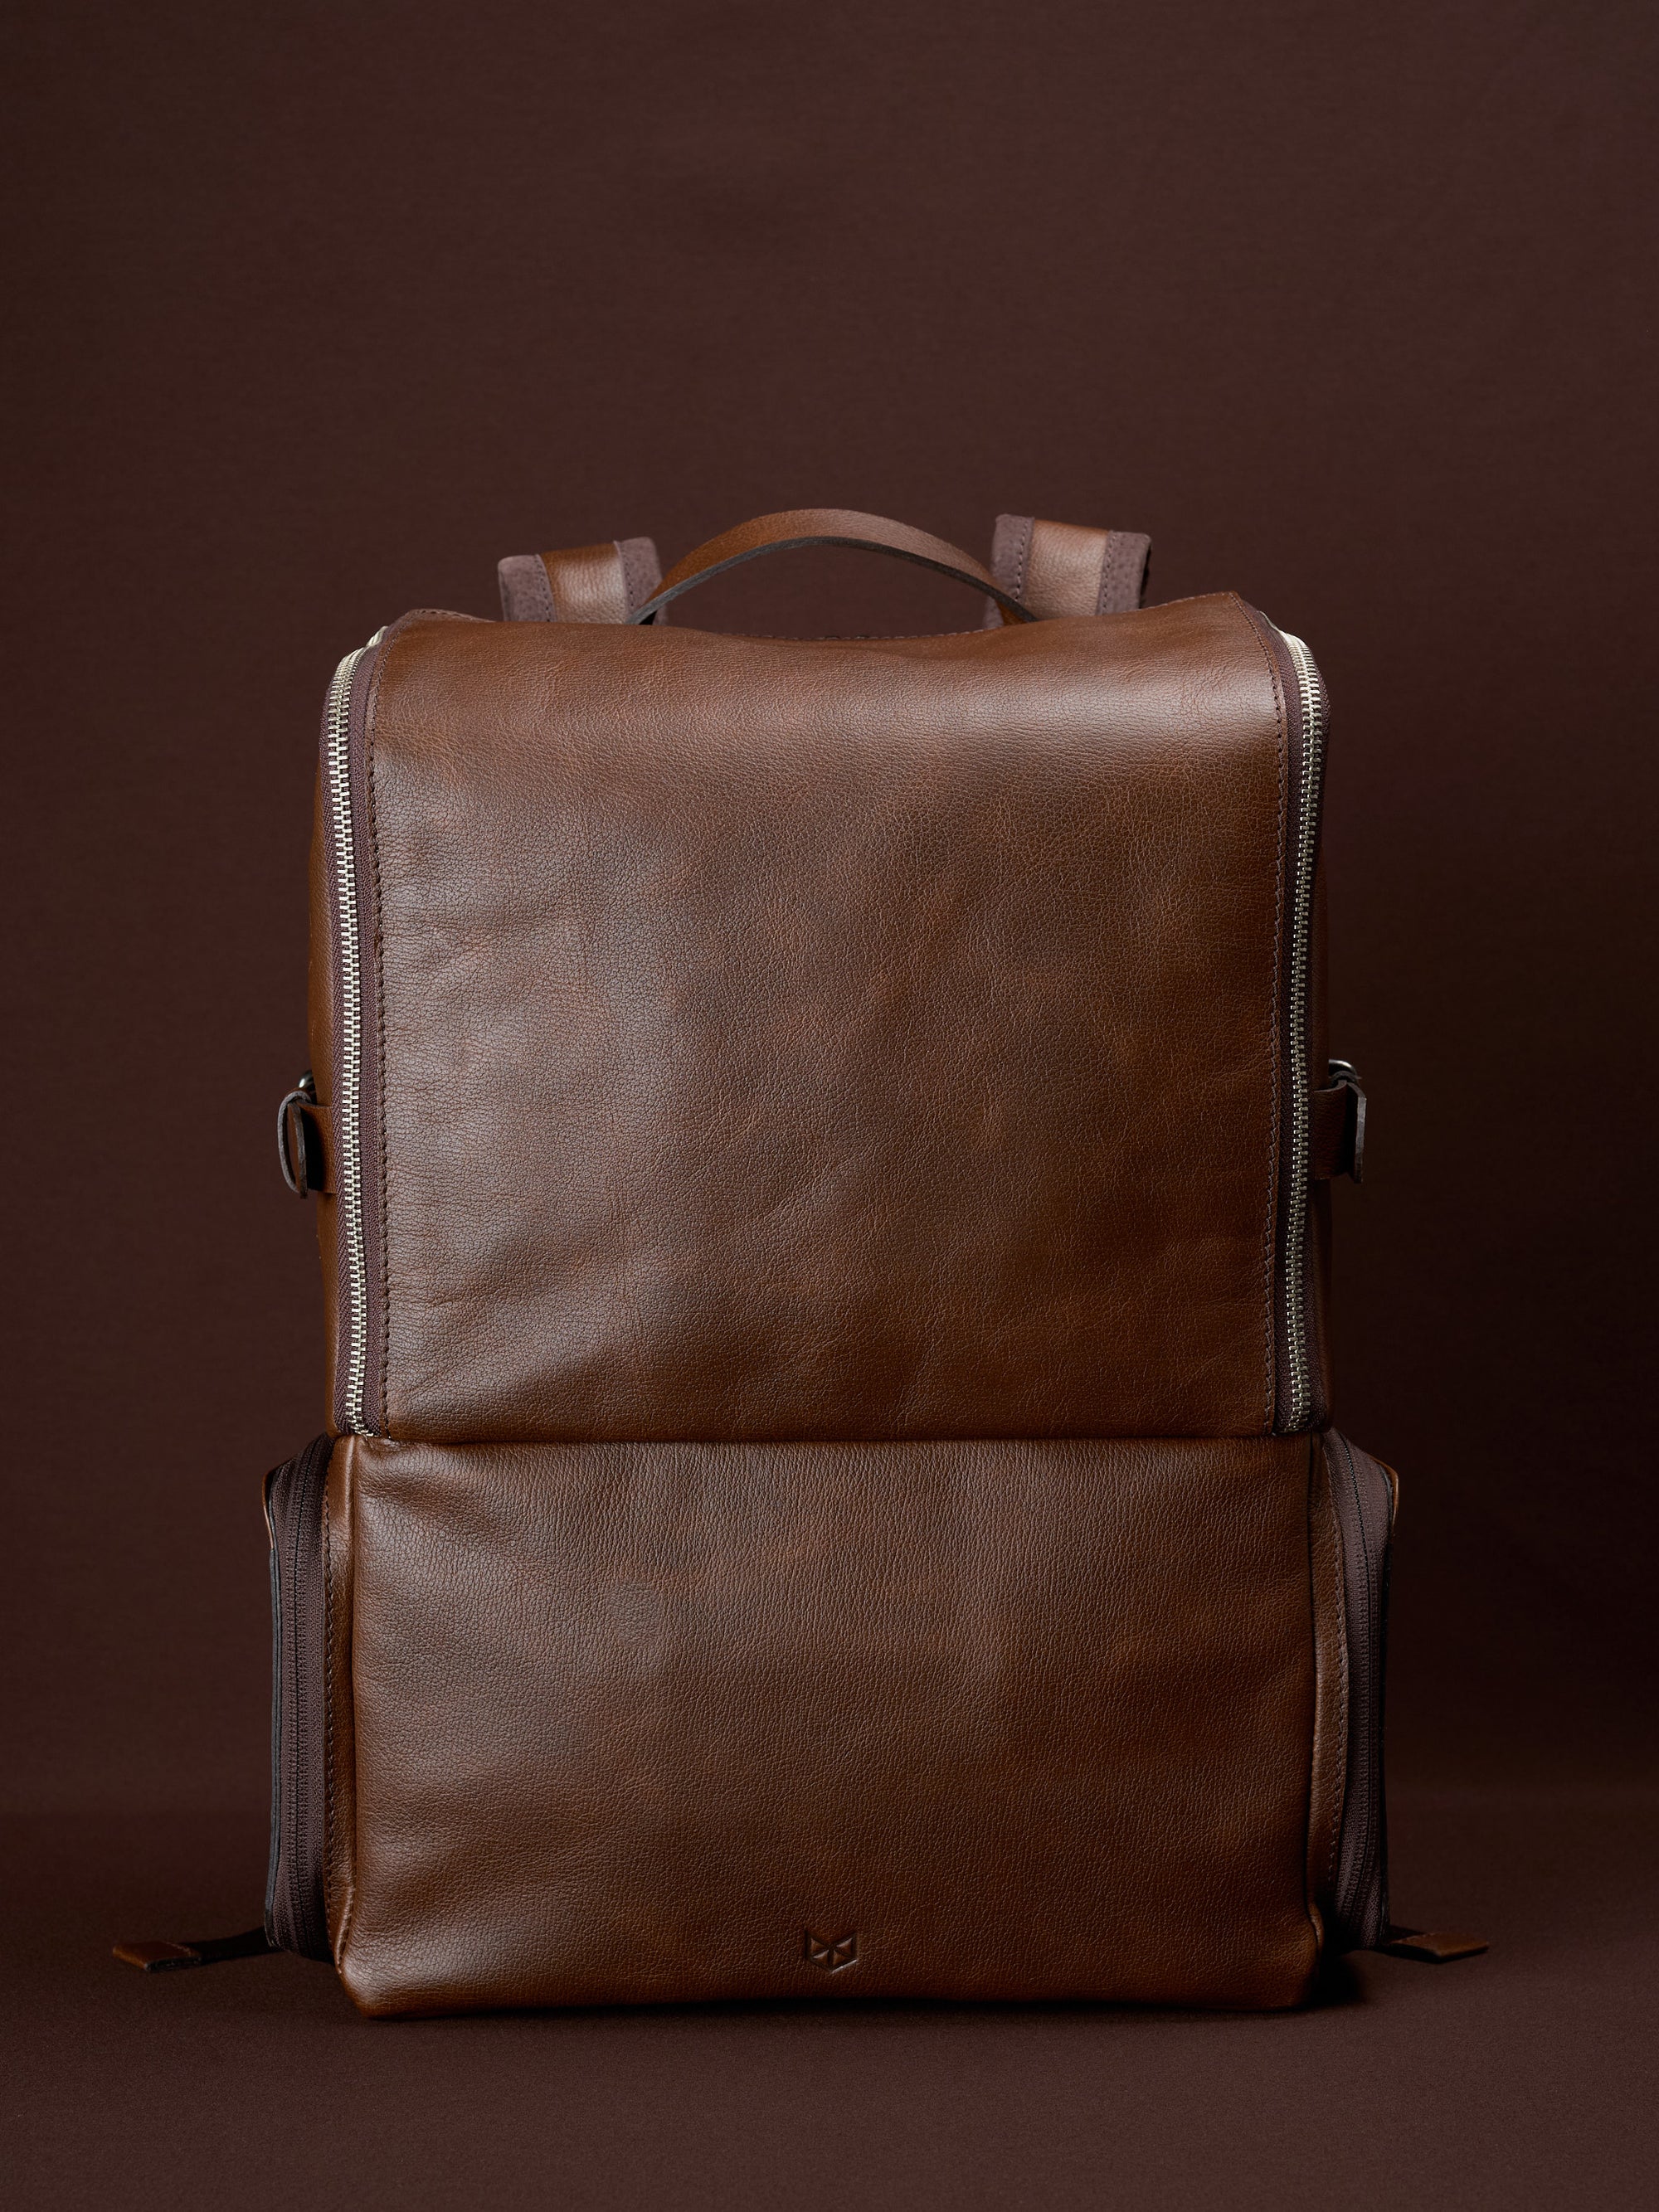 camera bag backpack brown by capra leather